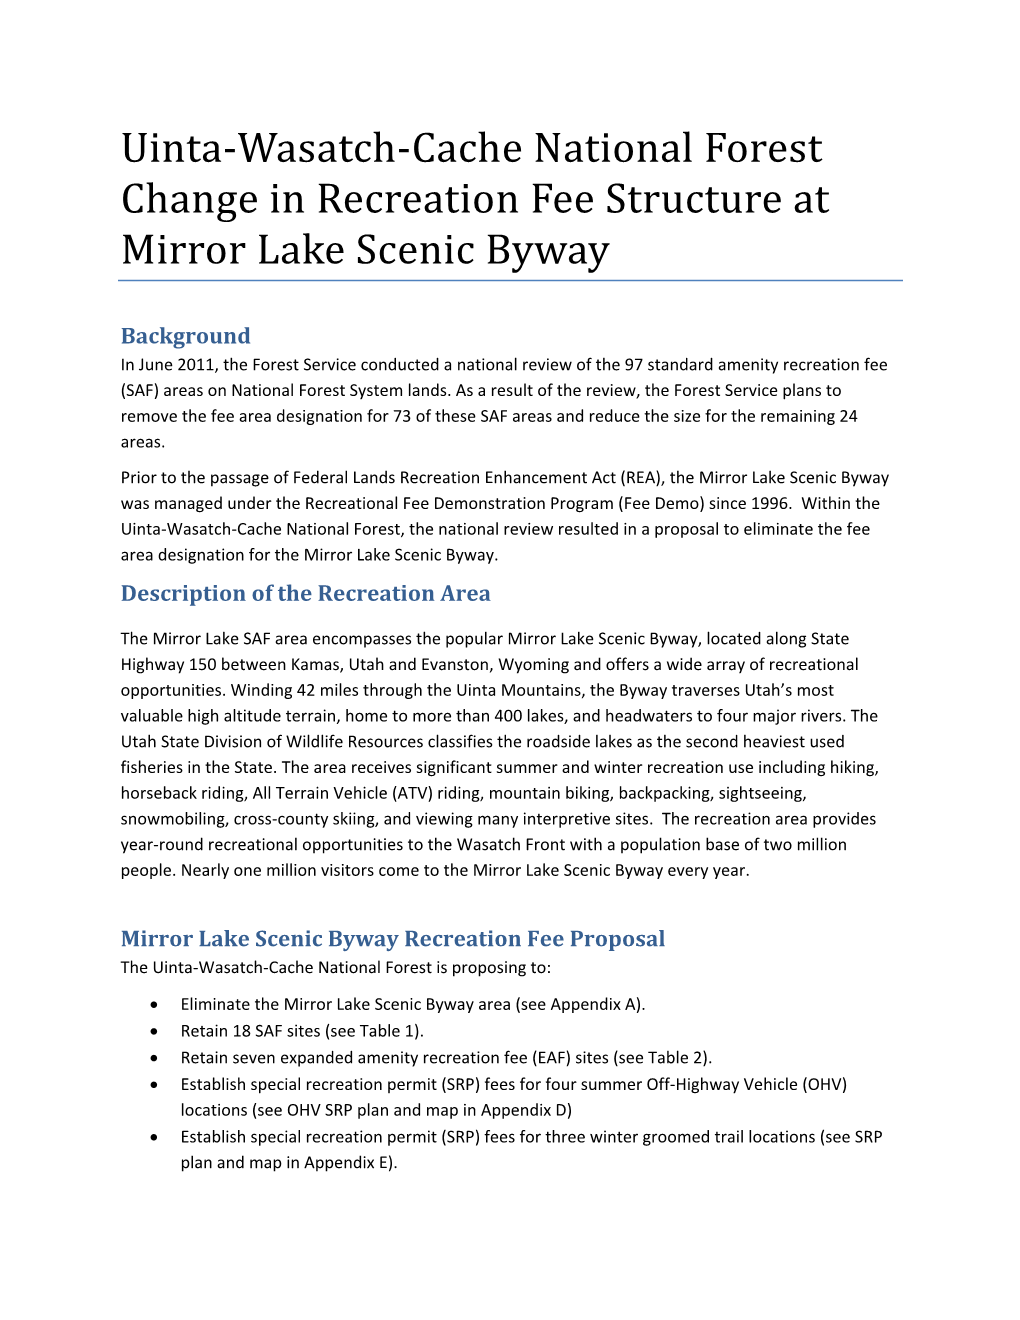 Uinta-Wasatch-Cache National Forest Change in Recreation Fee Structure at Mirror Lake Scenic Byway